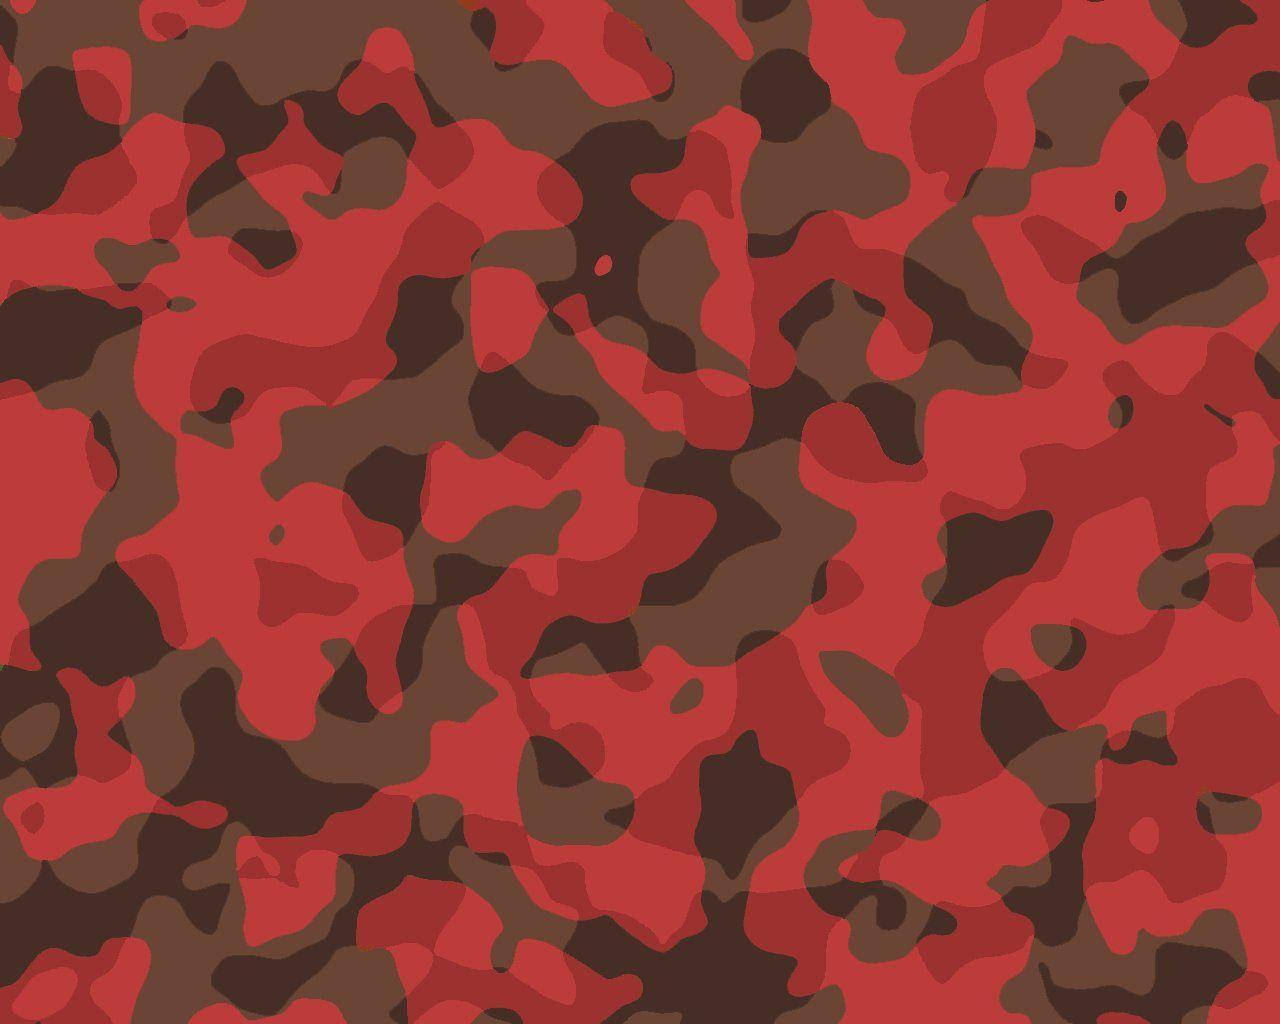 100+] Red Camo Wallpapers